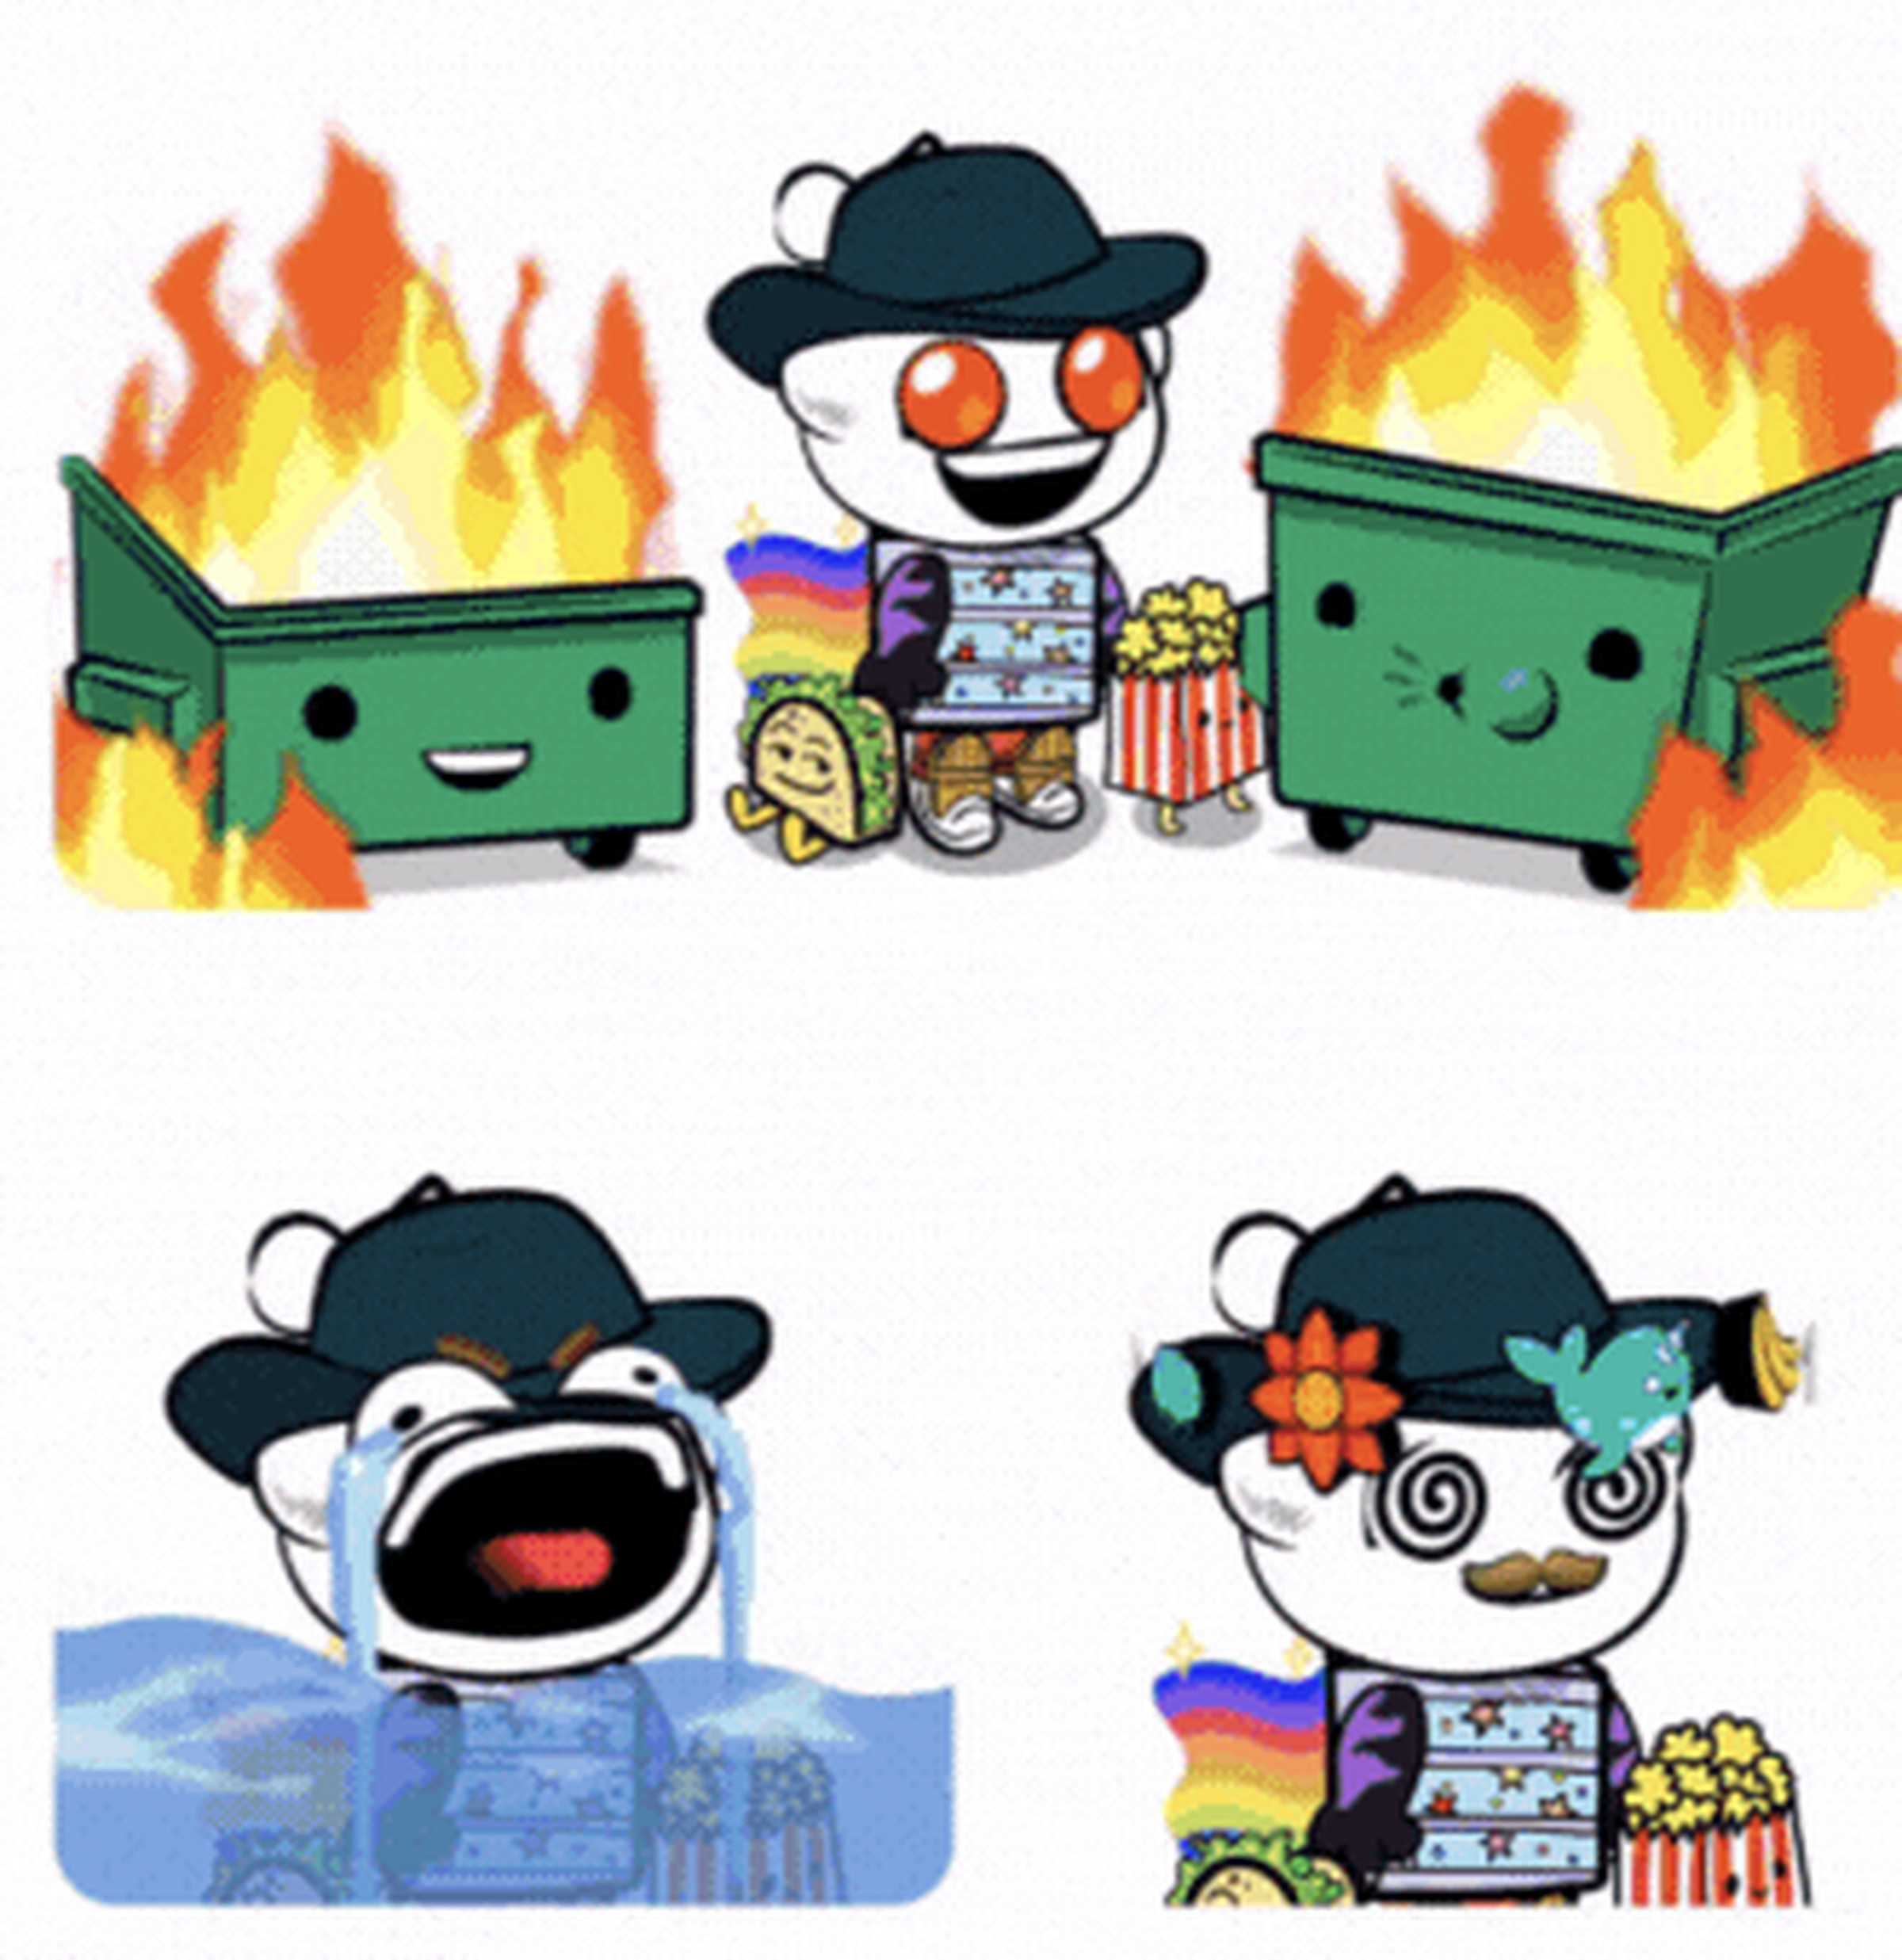 An image of Reddit’s Collectible Expressions.